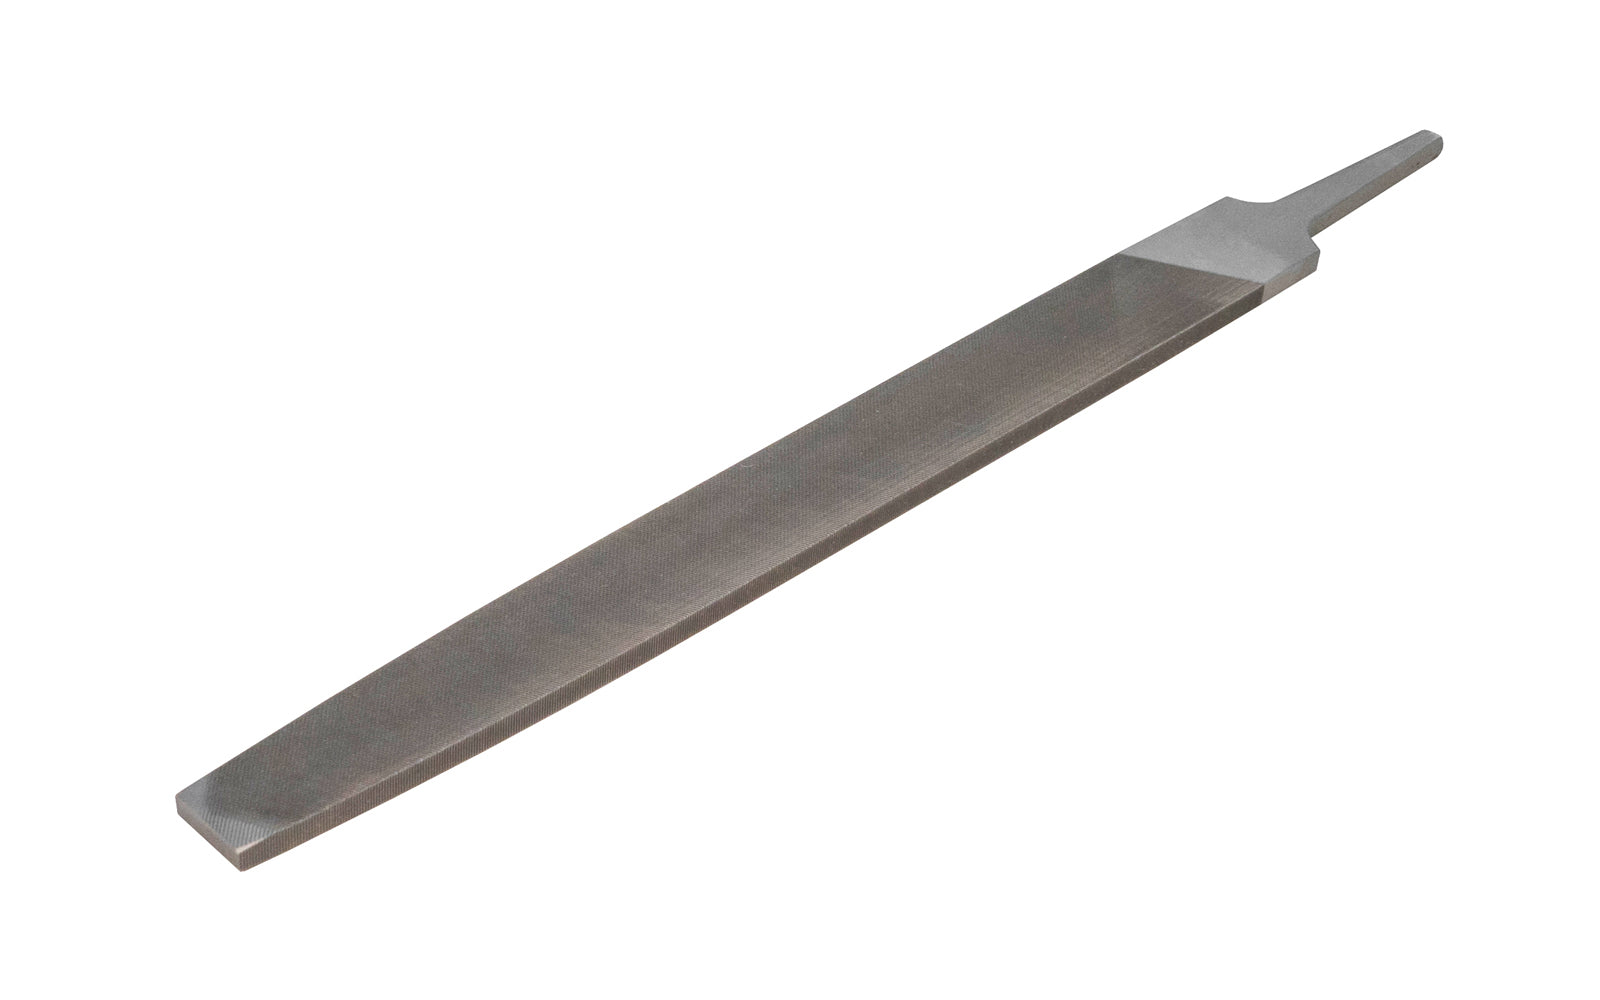 Bahco 10" Flat Taper Edge Smooth Cut File. Surfaces double cut, edge single cut. Taper shape enables to reach more easily into angles & corners. Great for filing flat surfaces, sharp corners & shoulders as well as for deburring. Made in Portugal. 1-110-10-3-0. 7311518313890